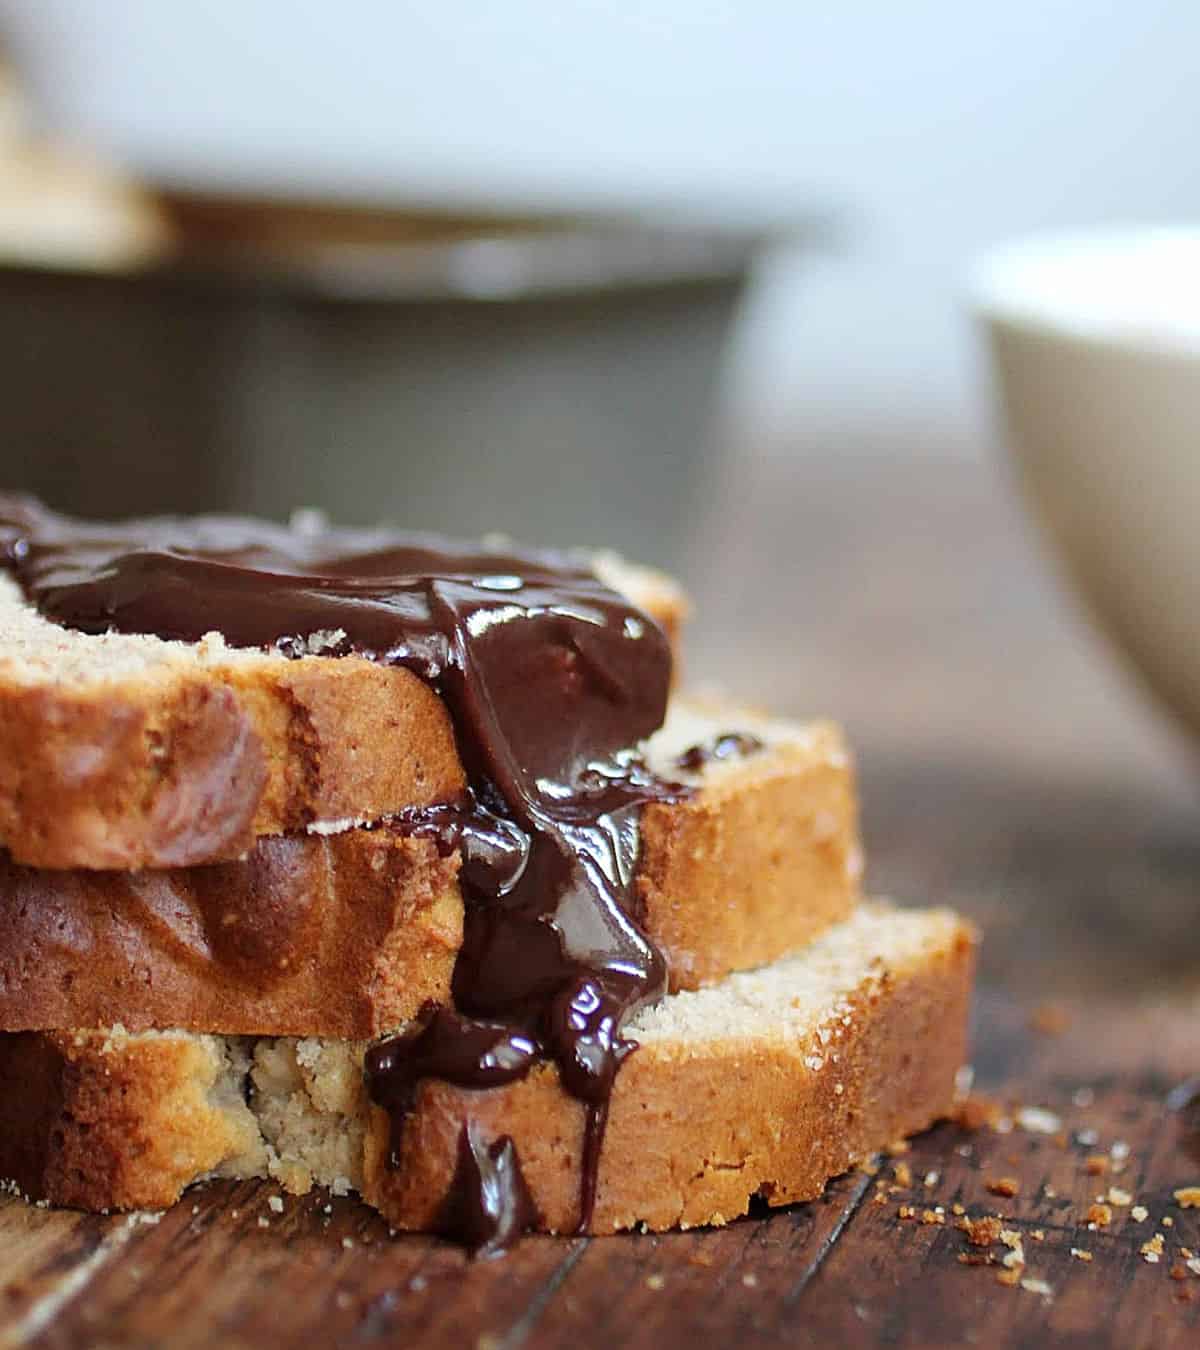 Stack of peanut butter quick bread slices with chocolate sauce, wooden table, metal pan in background.